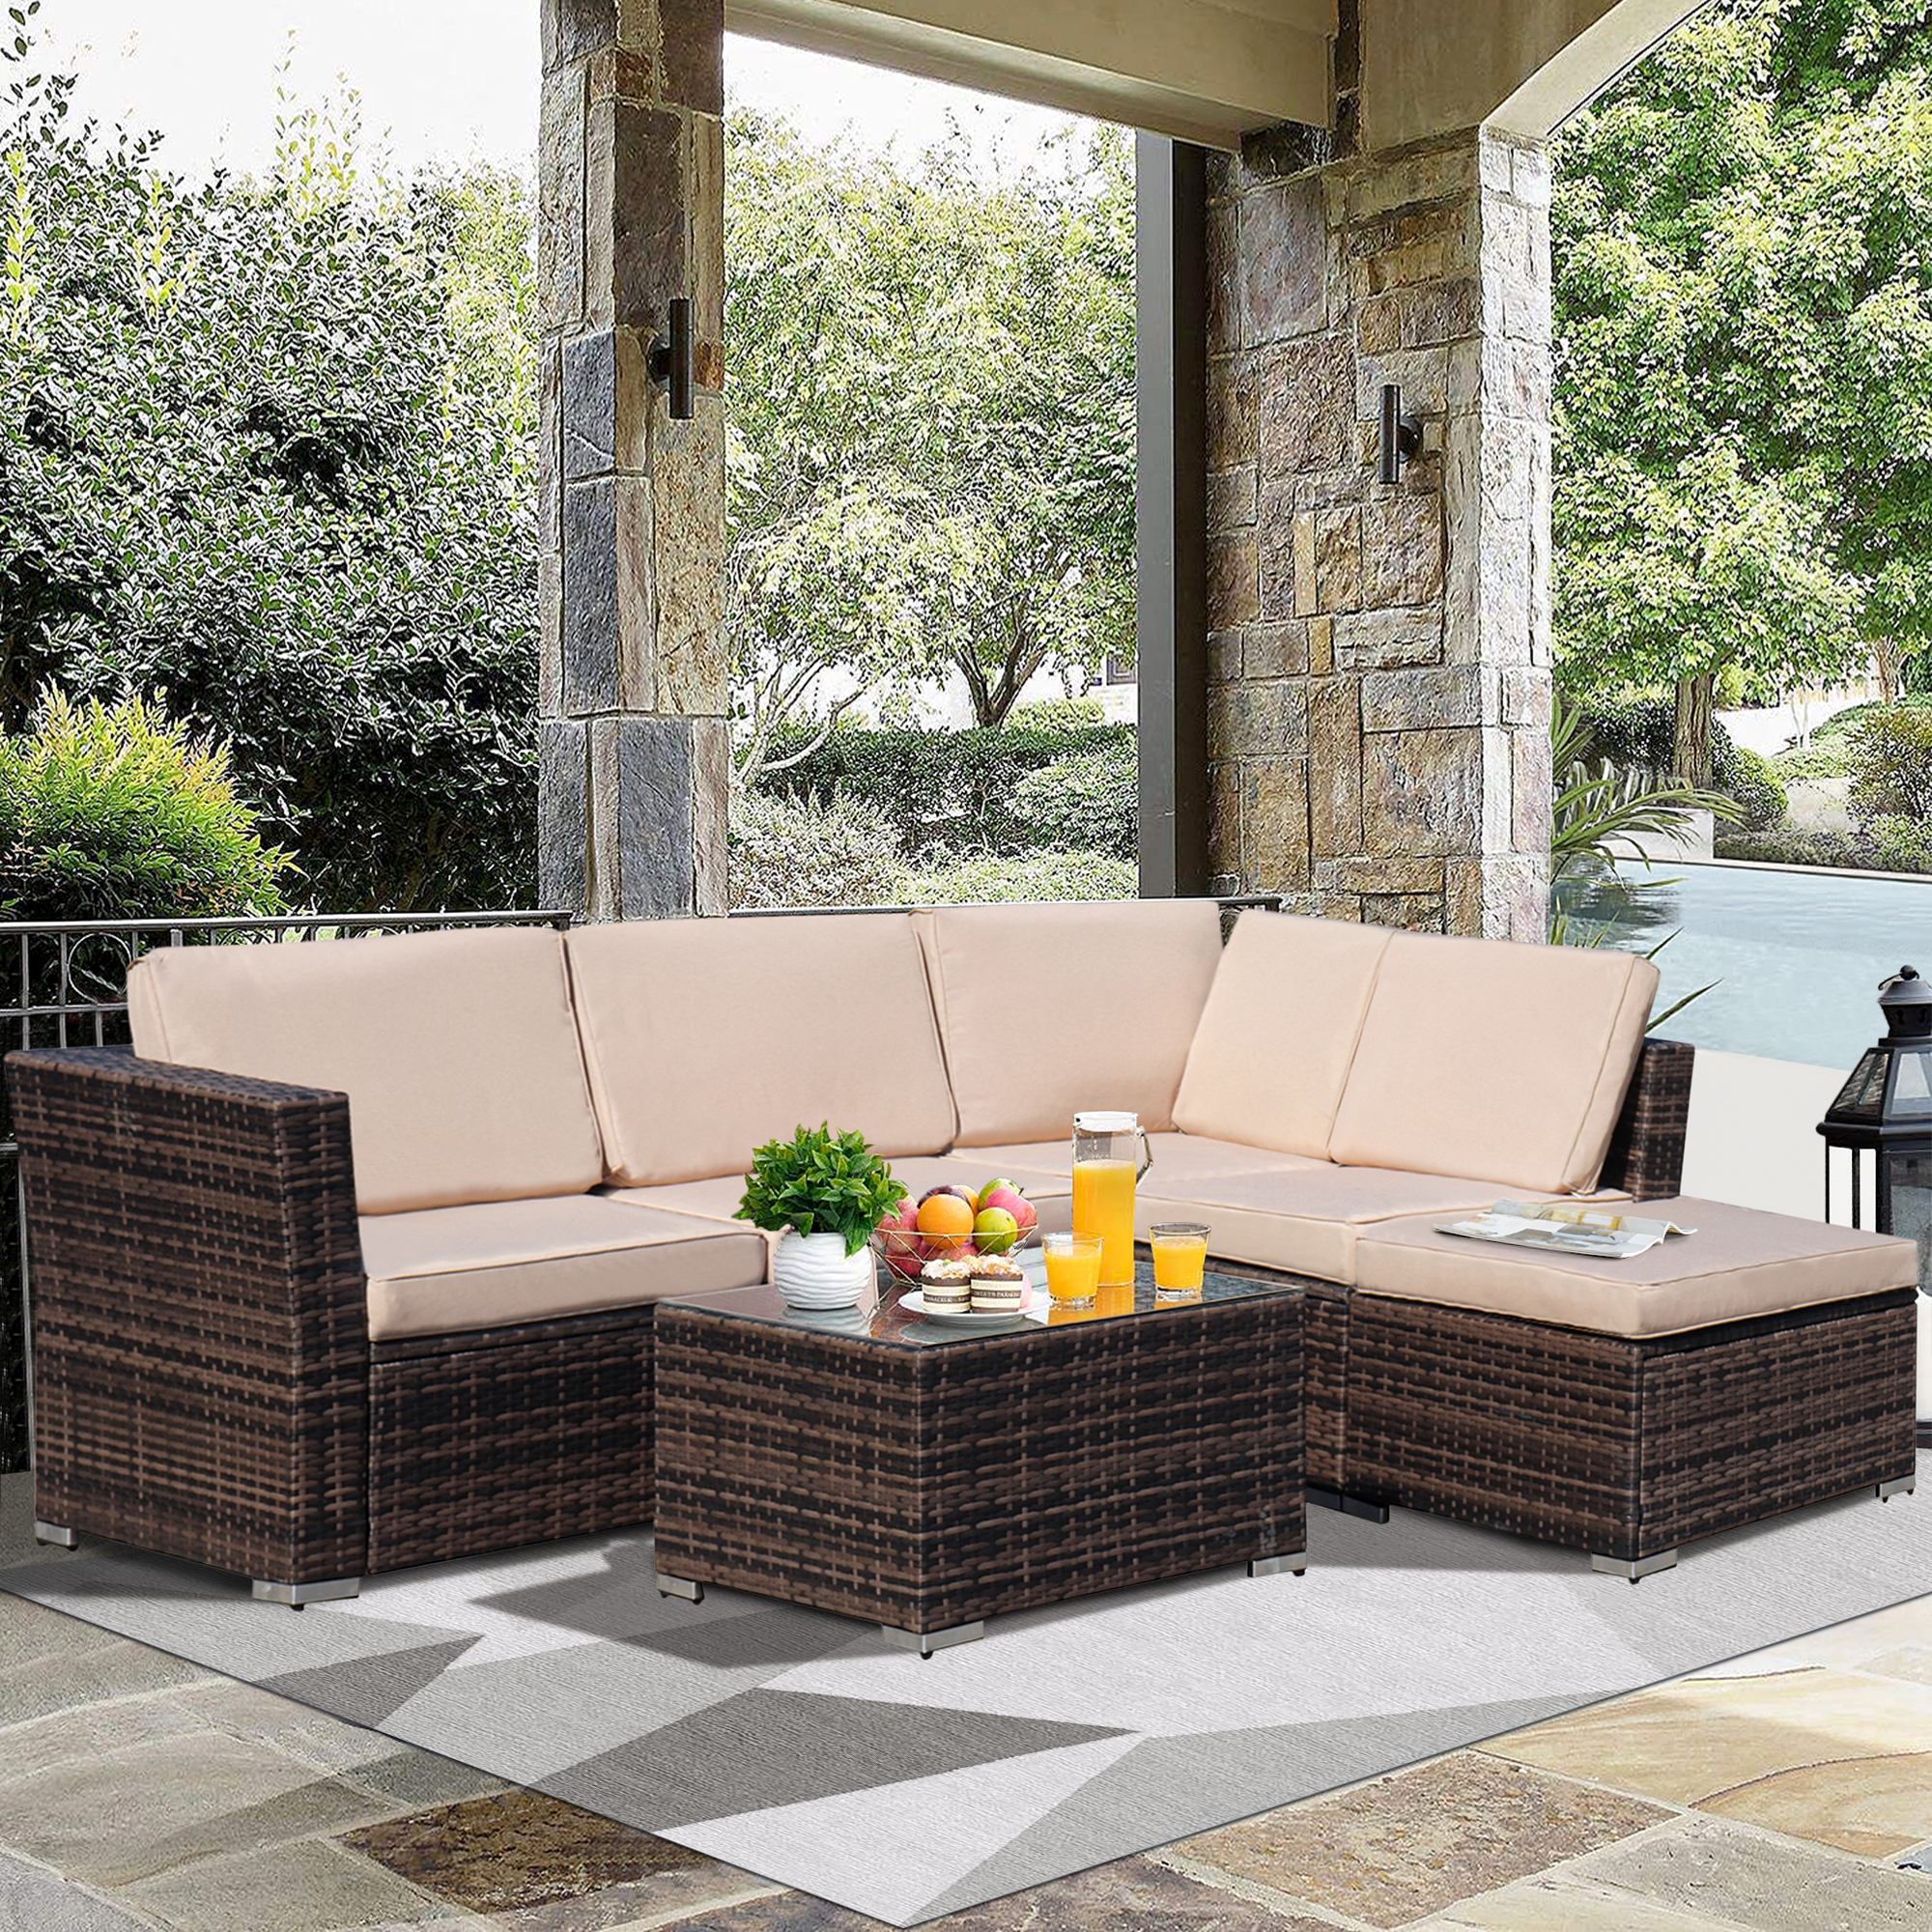 Outdoor Conversation Sets, 4 Piece Patio Furniture Sets with Loveseat Sofa, Lounge Chair, Wicker Chair, Coffee Table, Patio Sectional Sofa Set with Cushions for Backyard Garden Pool, LLL1326 - image 2 of 9